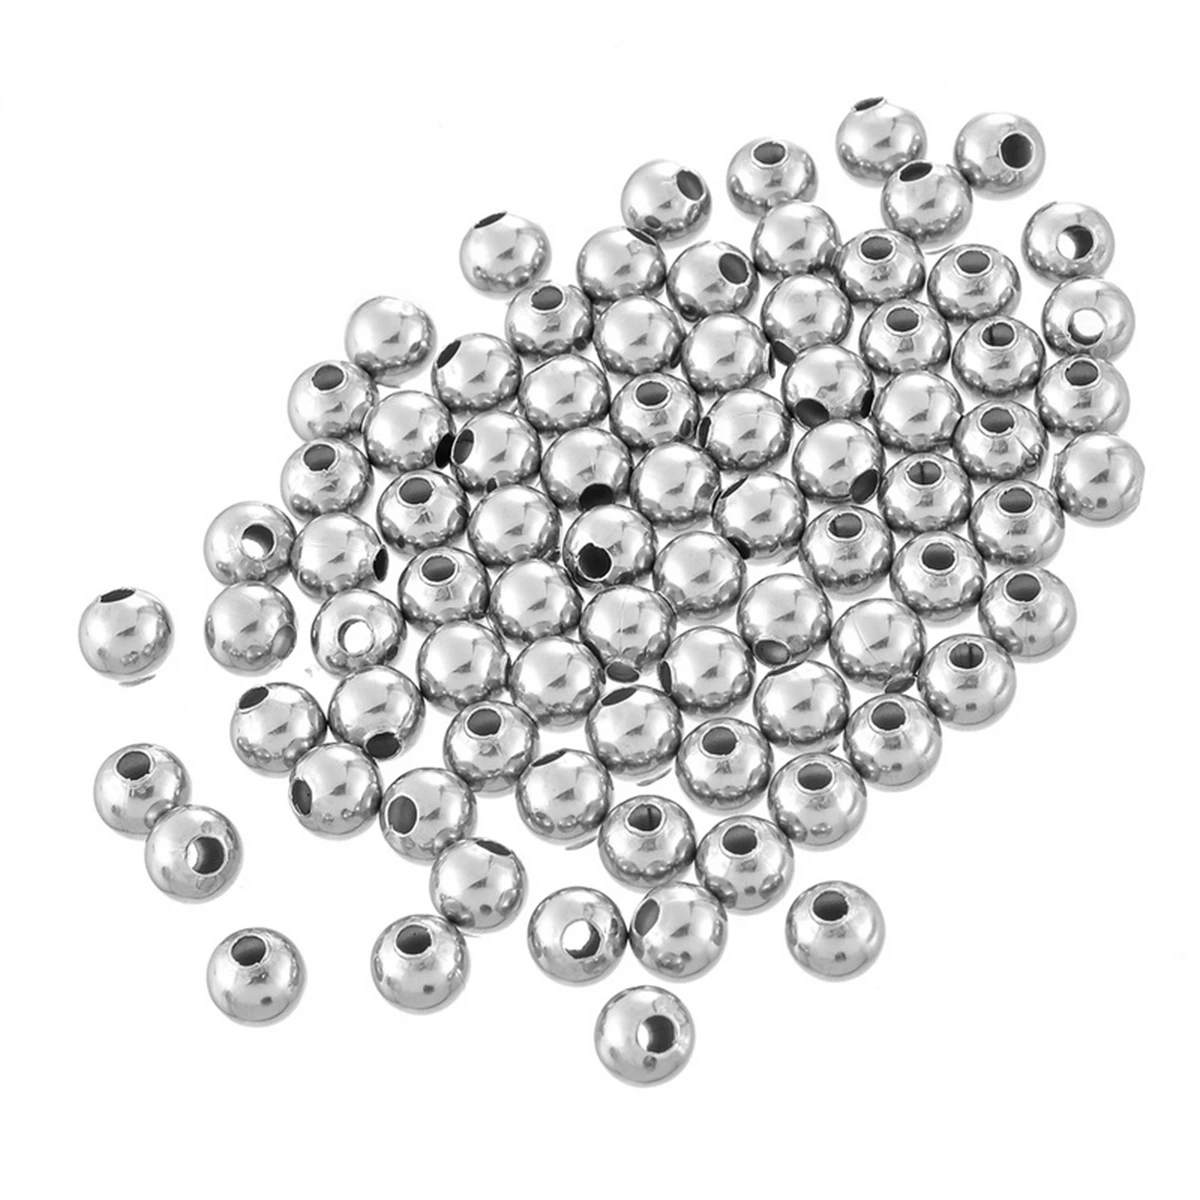 

10-50PCs 2.4x2.4mm Stainless Steel Round Hollow Beads For Jewelry Findings Making DIY Beads Accessories Necklaces Bracelets